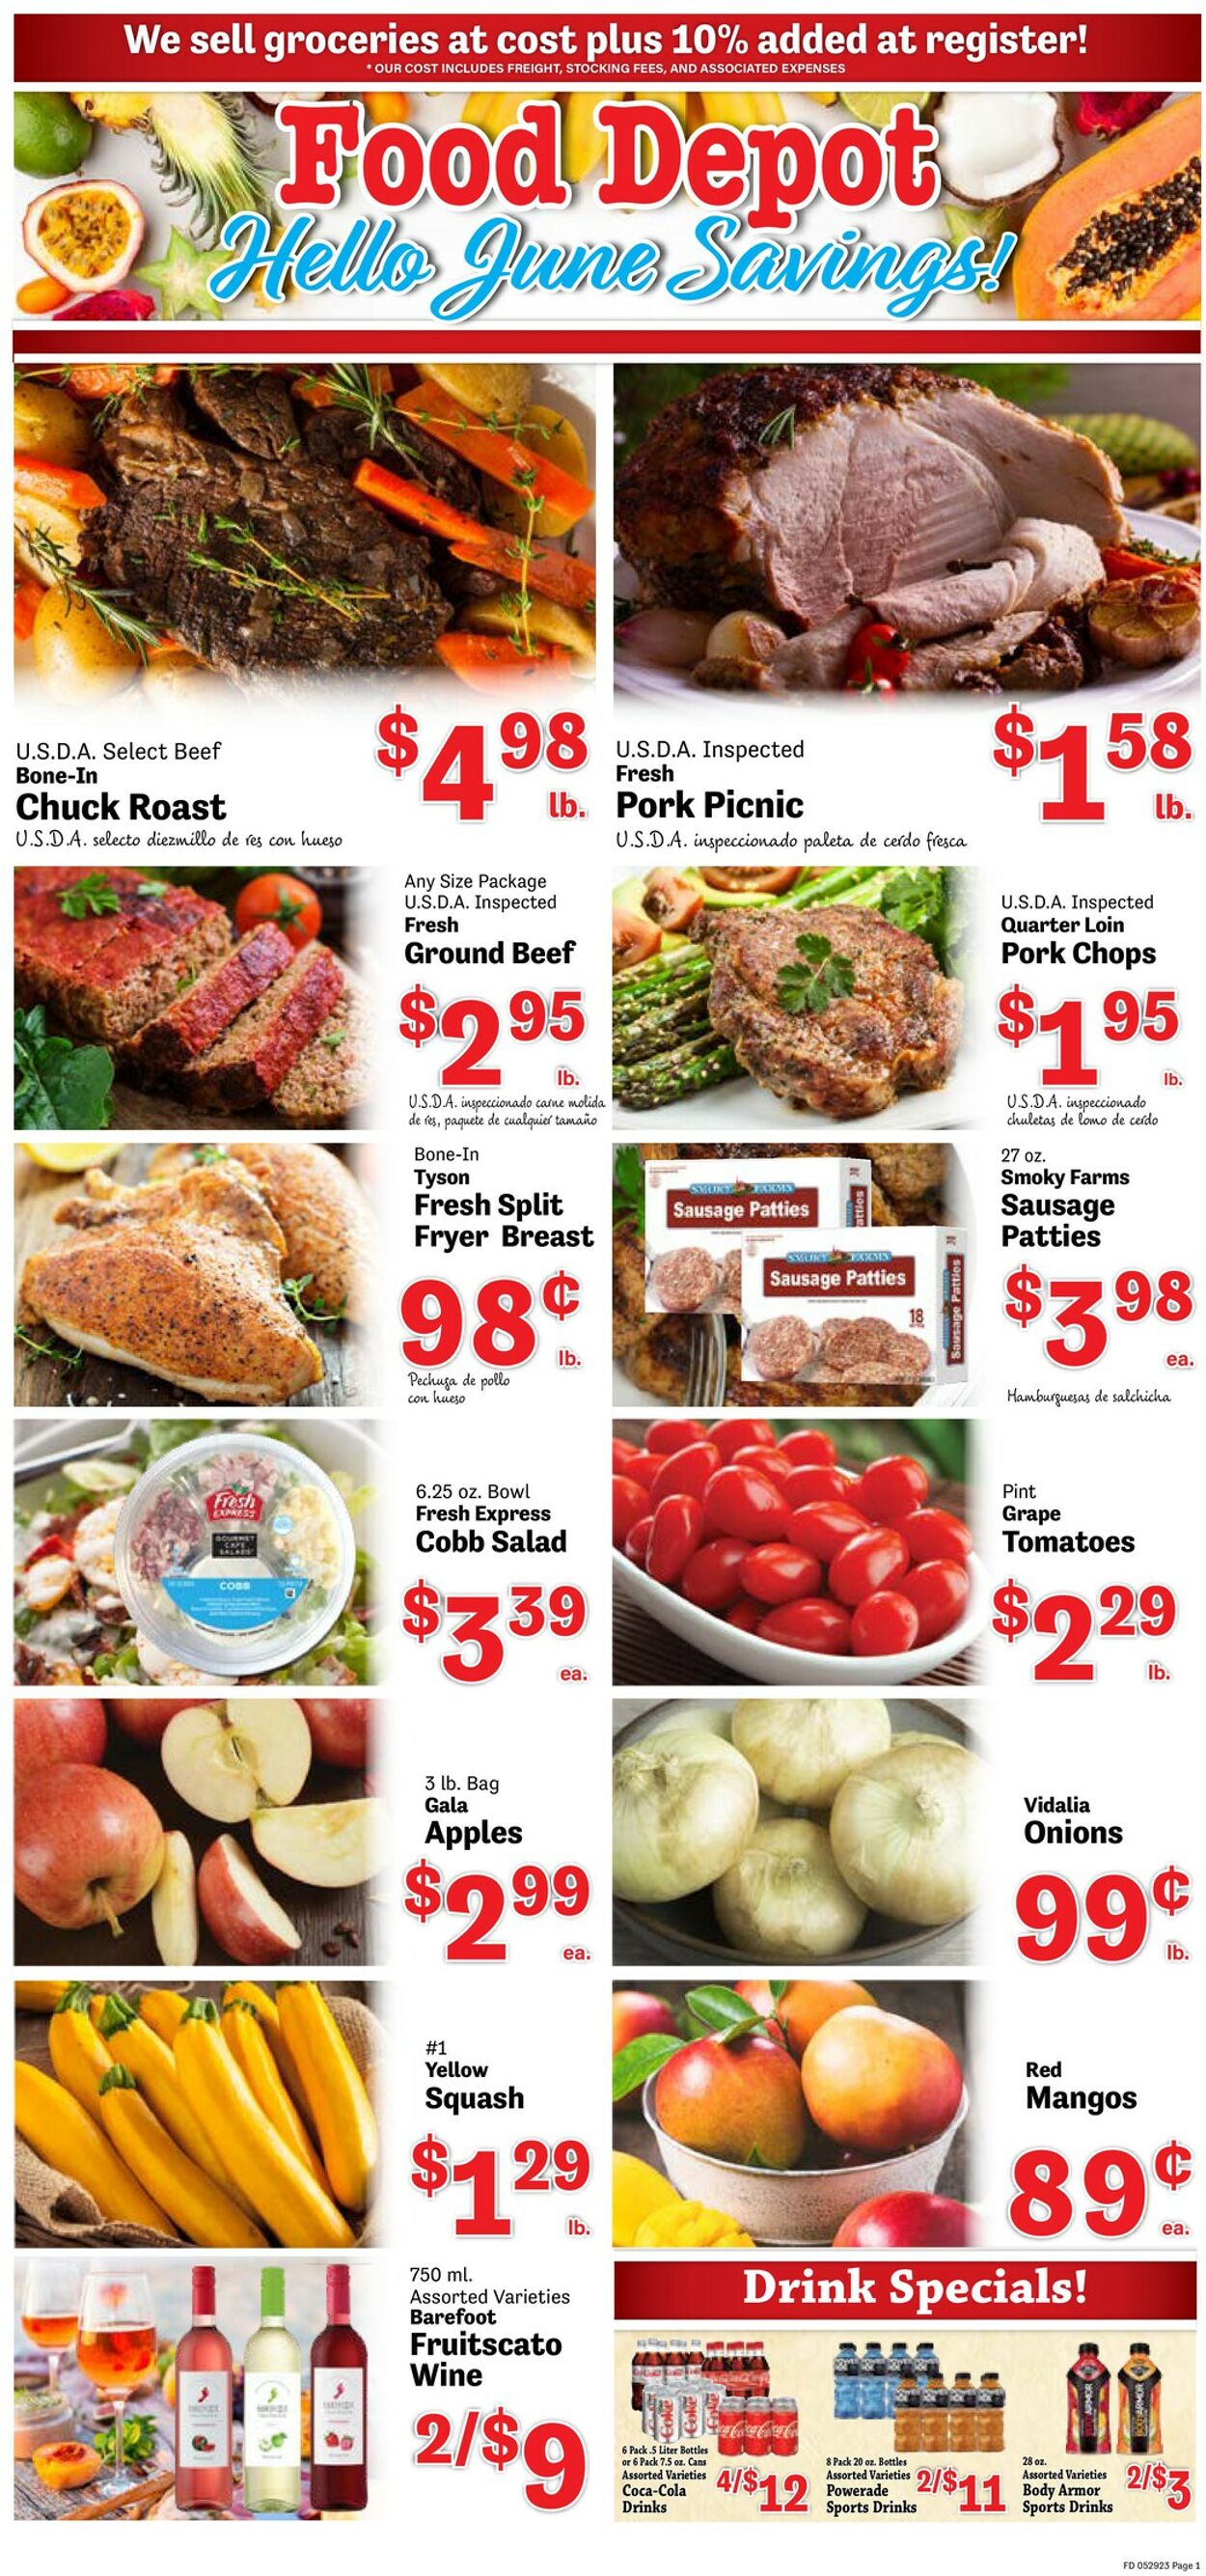 Food Depot Promotional weekly ads